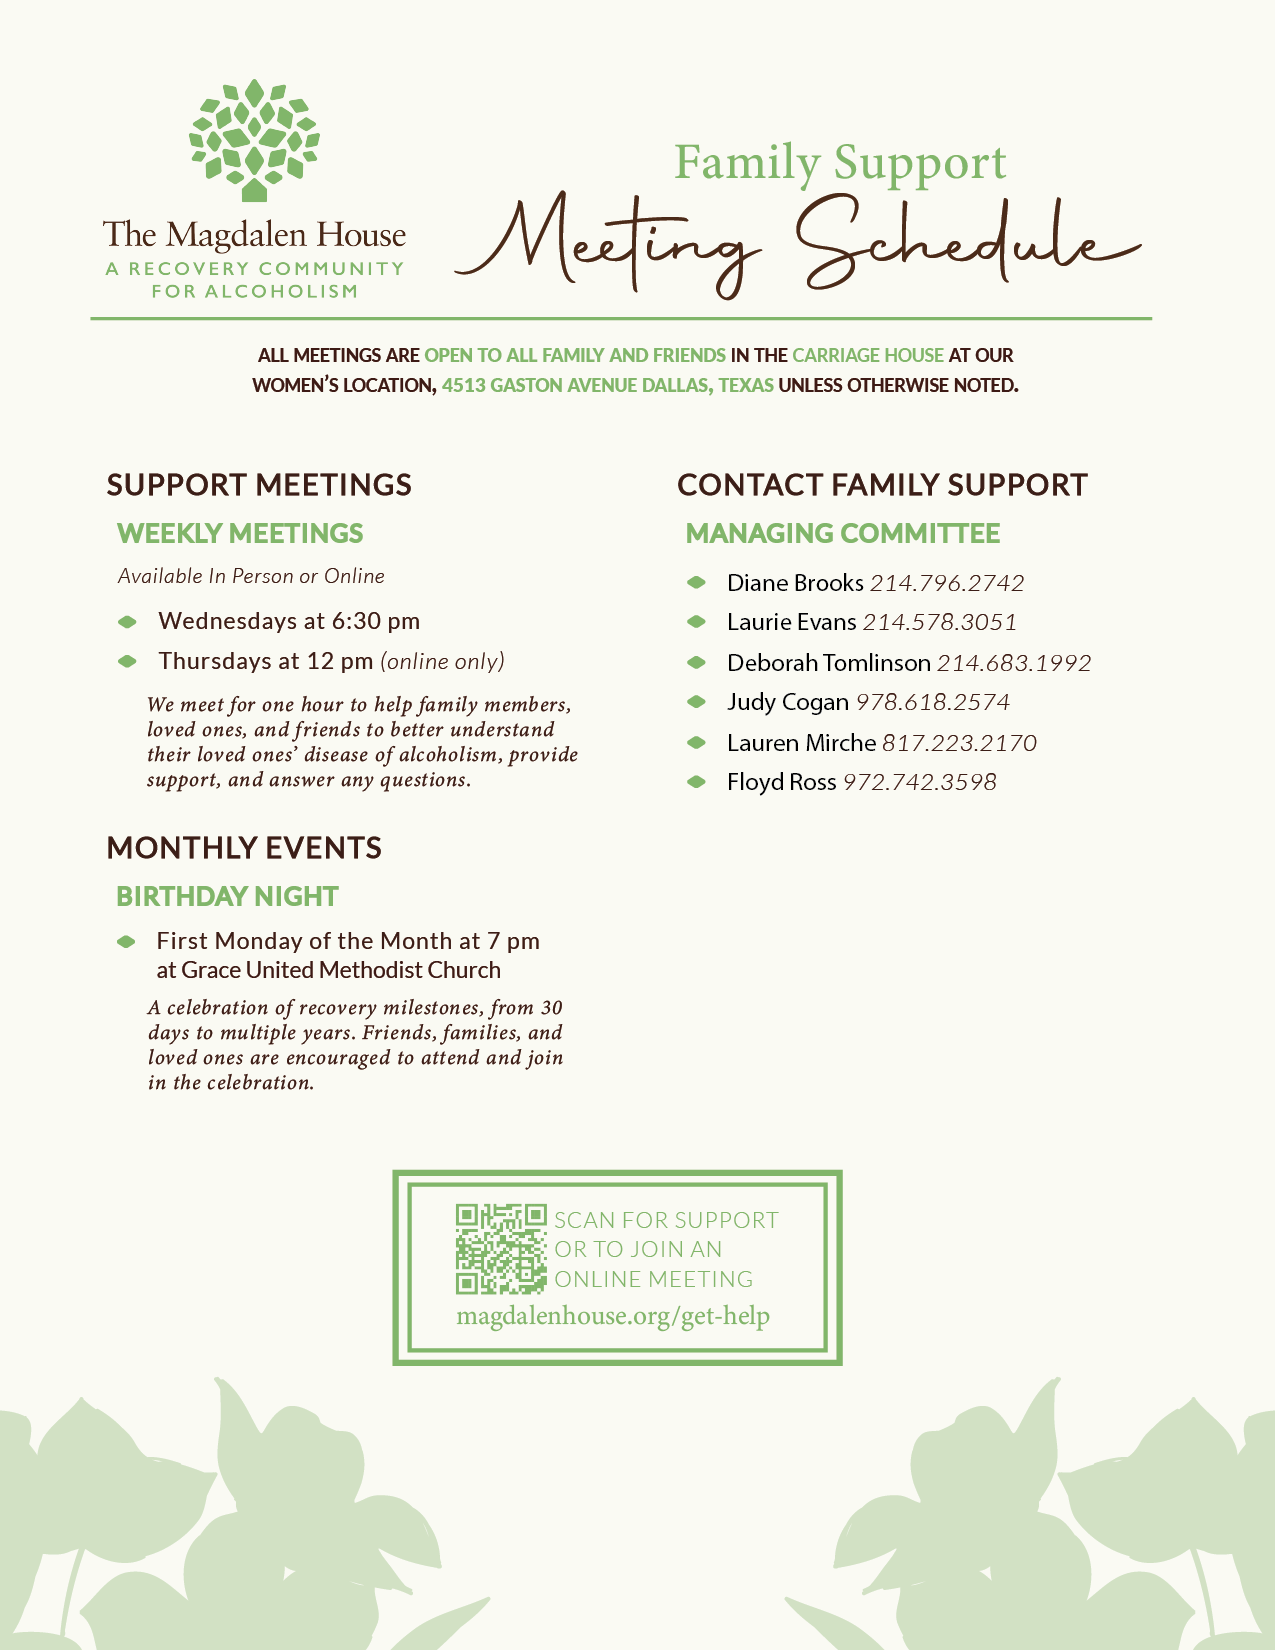 Family Support Meeting Schedule